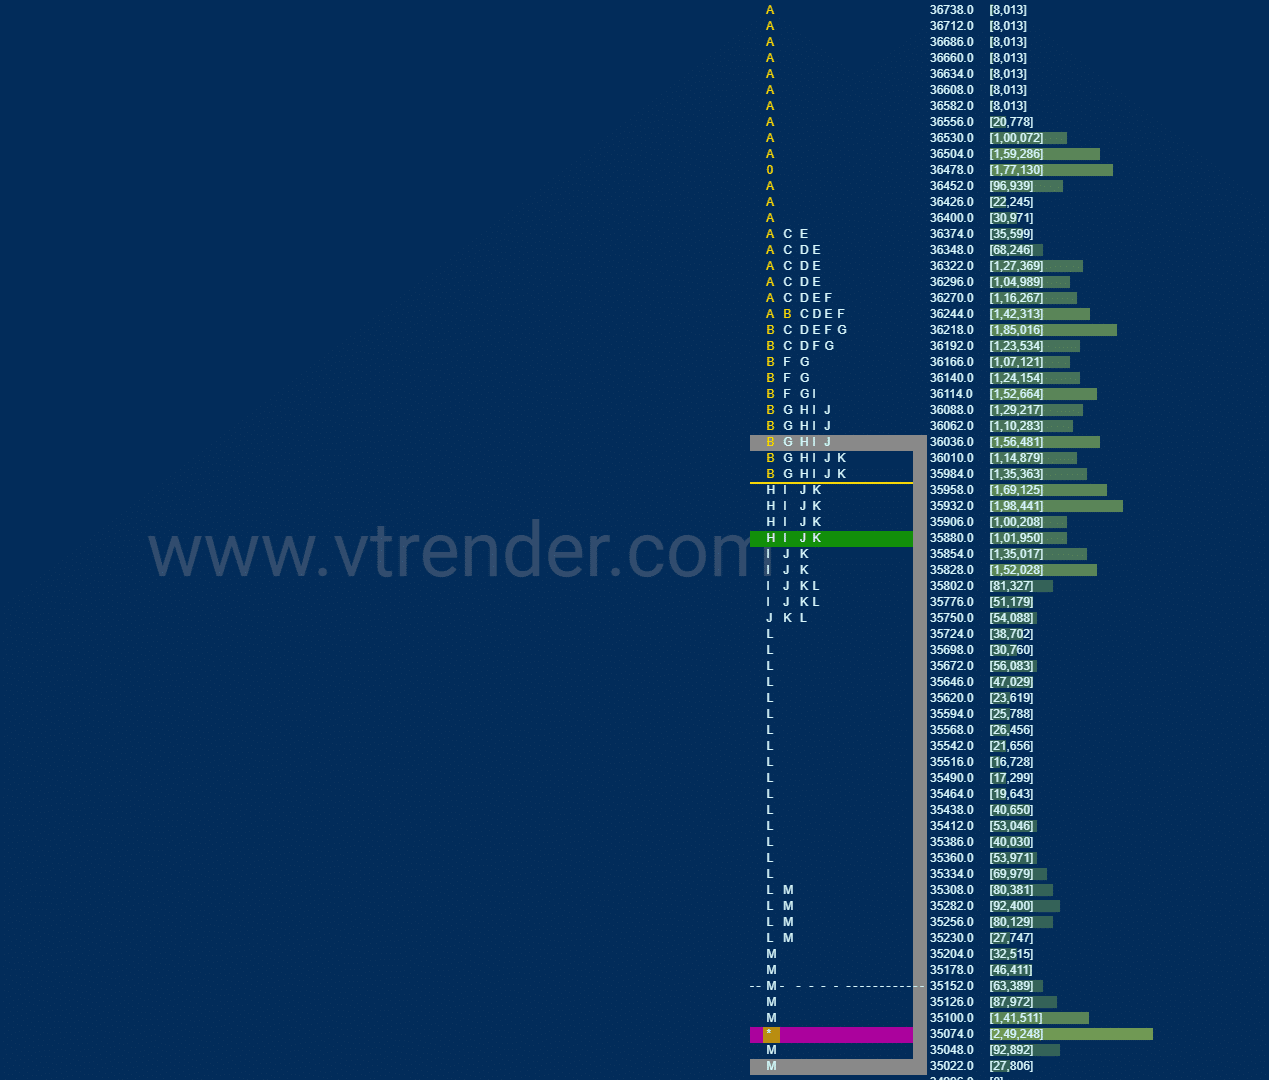 Bnf 17 Market Profile Analysis Dated 24Th February 2022 Banknifty Futures, Charts, Day Trading, Intraday Trading, Intraday Trading Strategies, Market Profile, Market Profile Trading Strategies, Nifty Futures, Order Flow Analysis, Support And Resistance, Technical Analysis, Trading Strategies, Volume Profile Trading